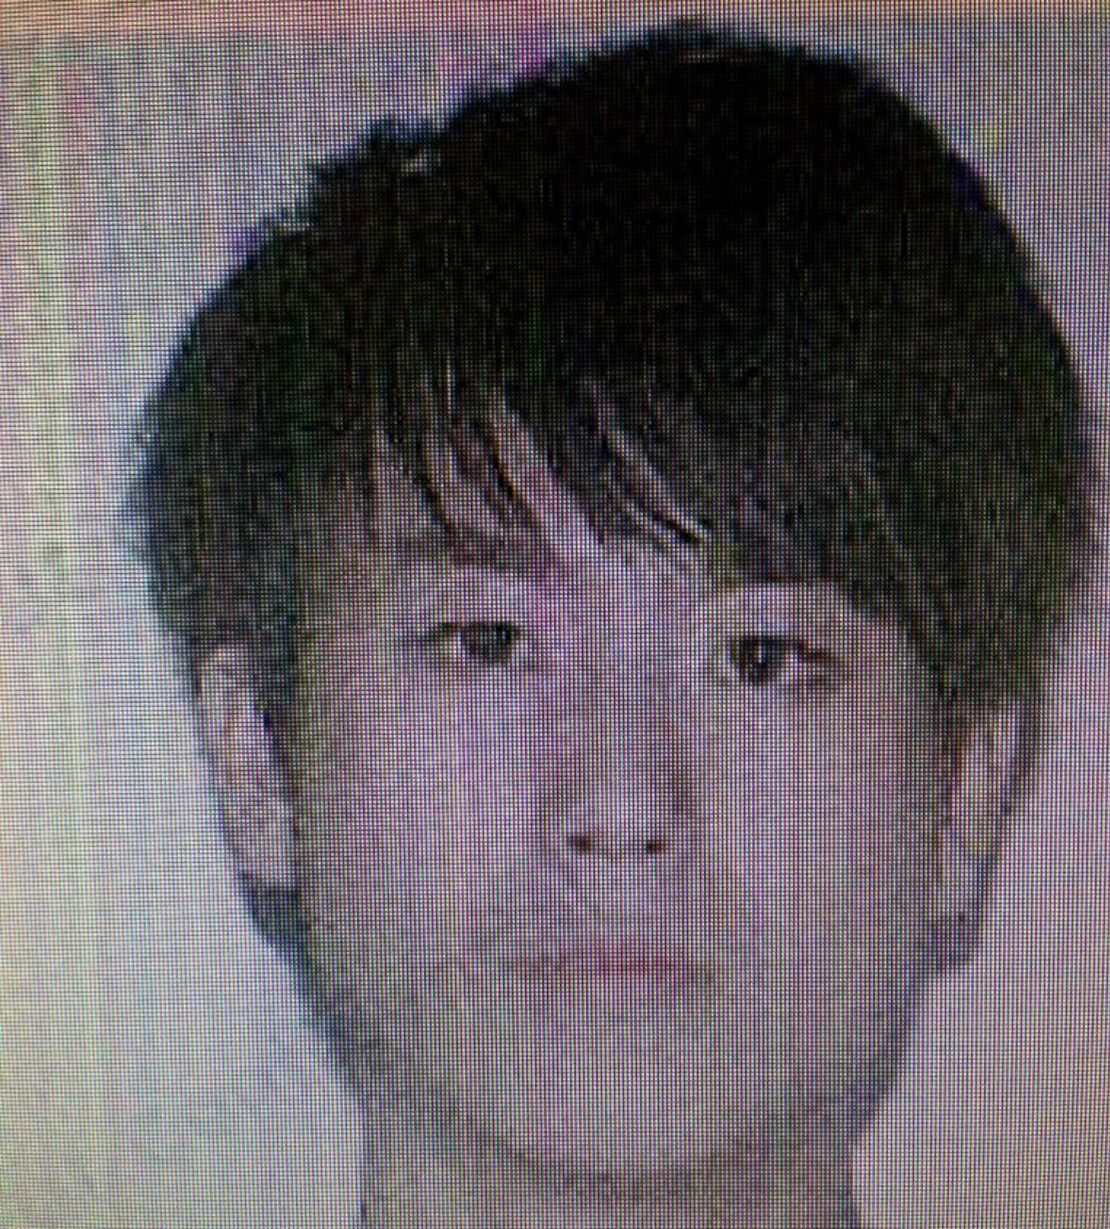 Police records show Xiangnan Li, 23, stayed with Tong the weekend she disappeared. He then left for China.